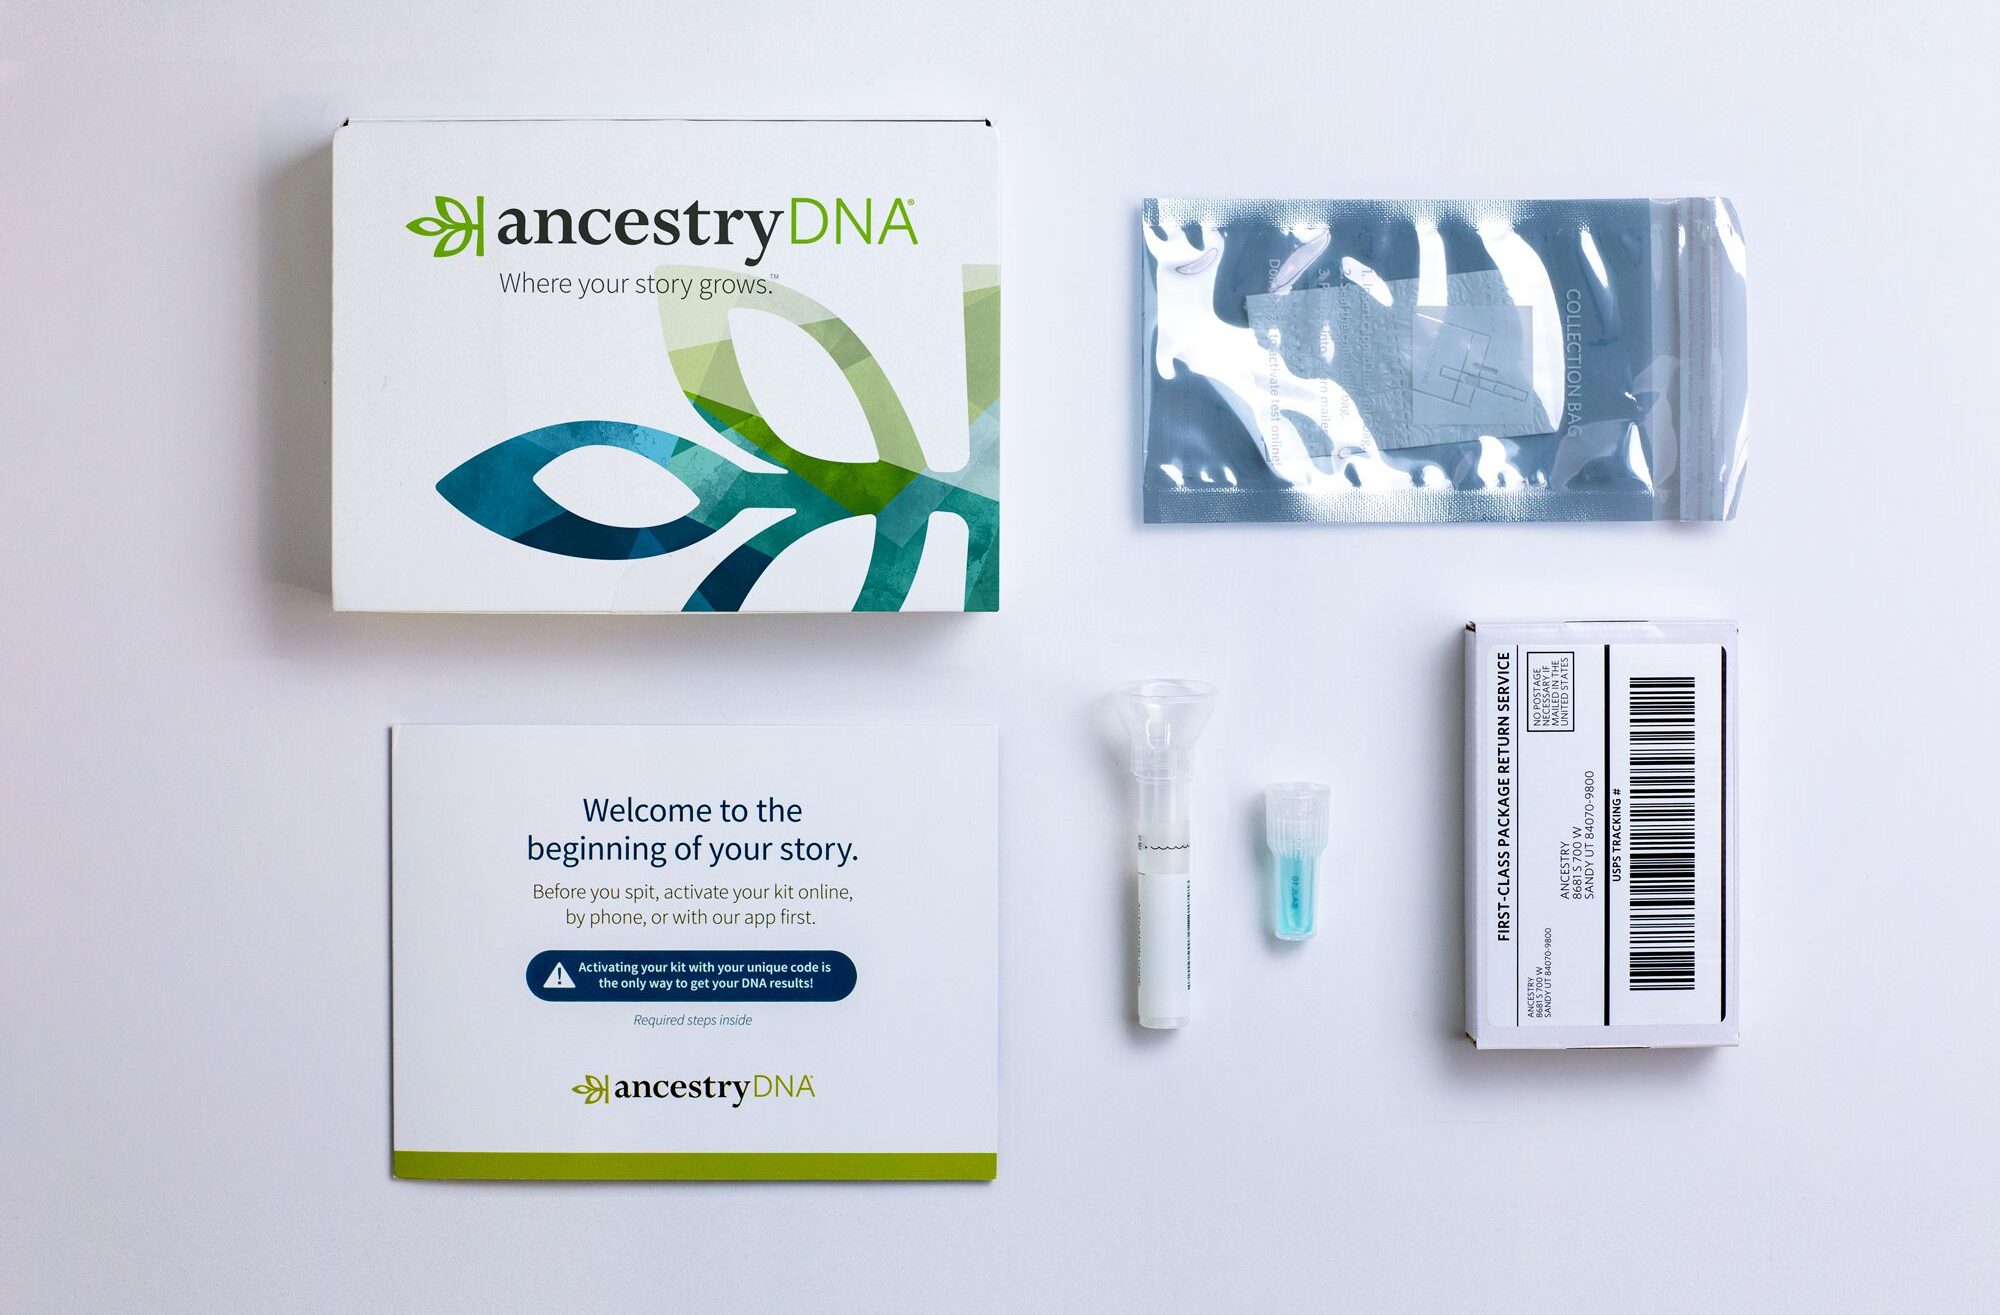 DNA tests can have life-altering consequences, say consumers - The Daily  Universe